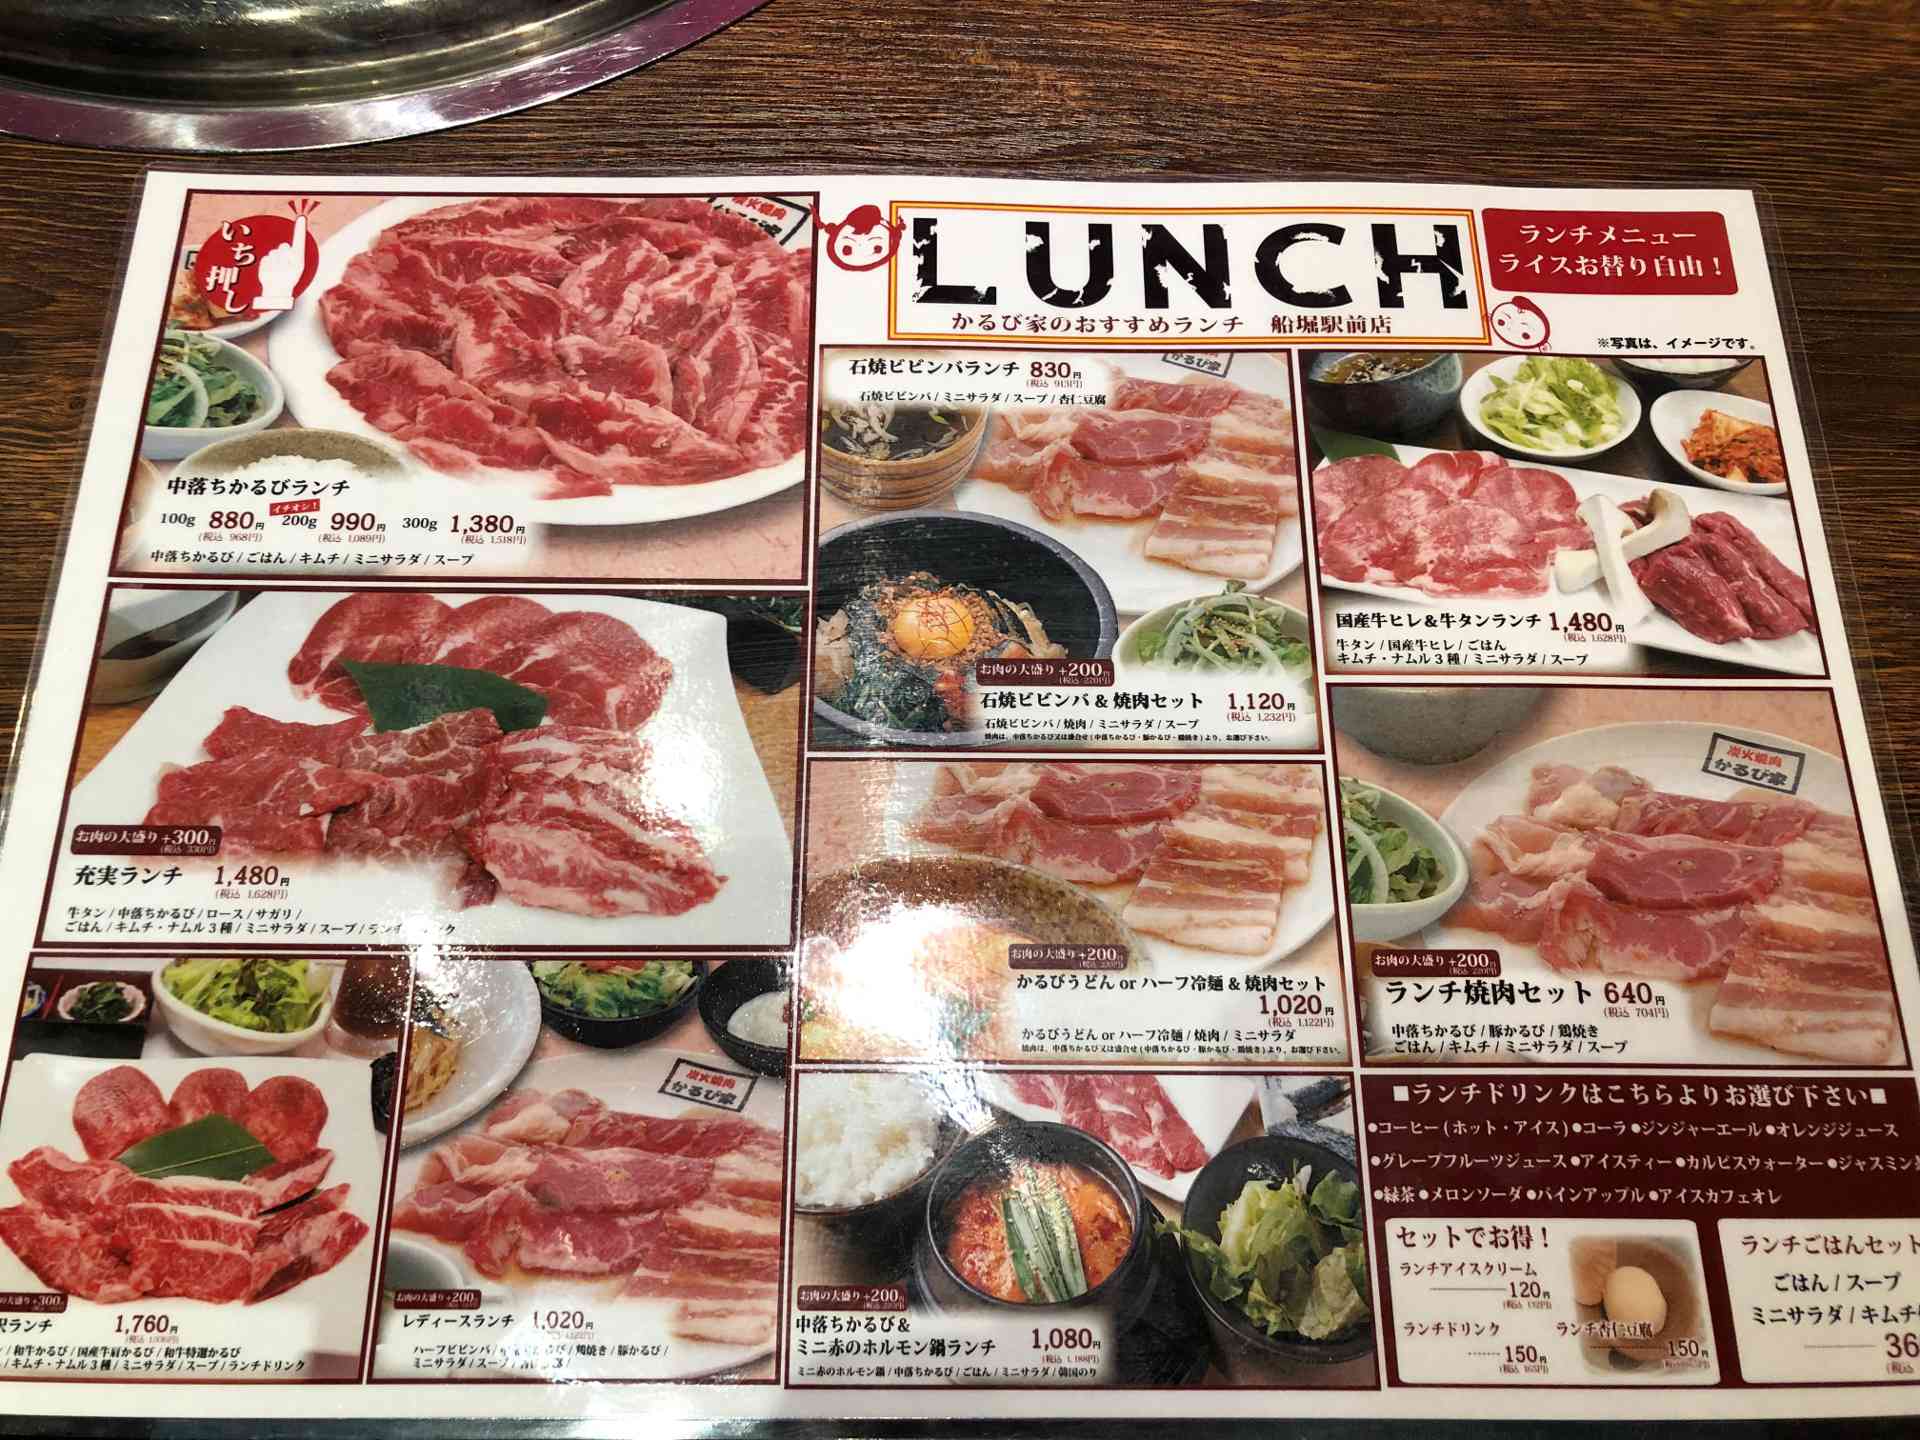 【Food and Drink】ワクチン2回目接種後かるび屋で焼肉ランチ